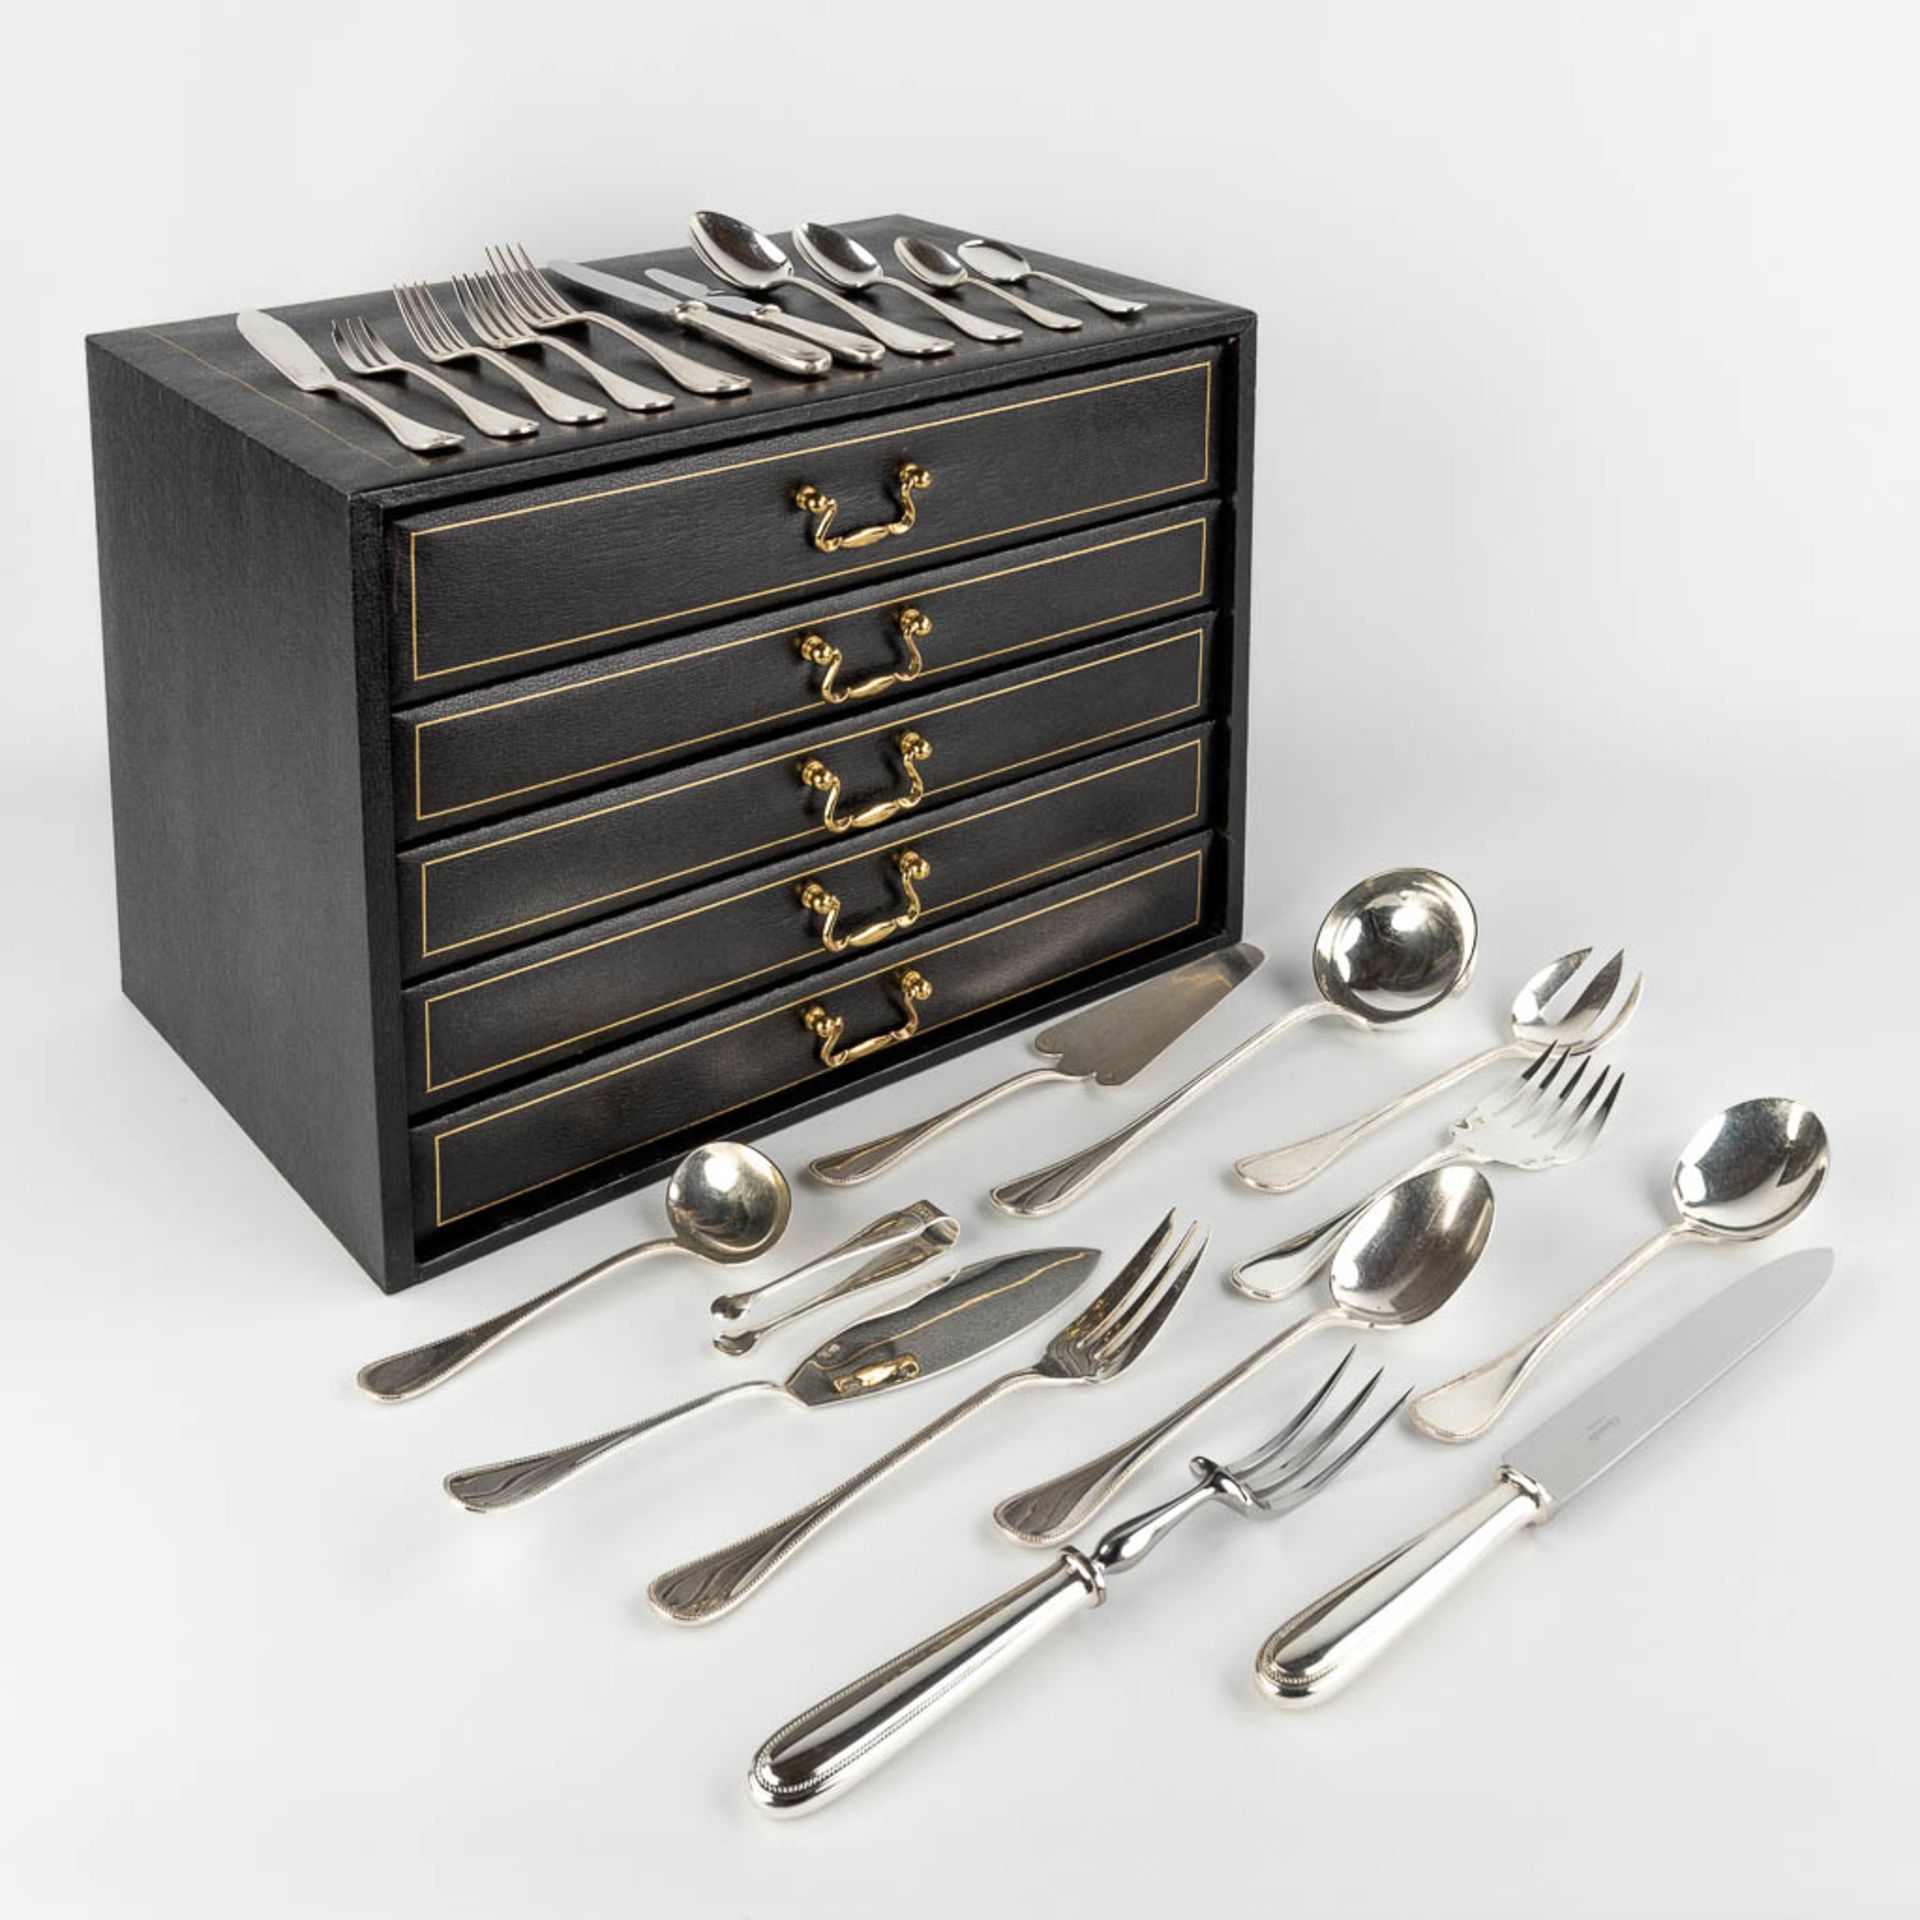 Christofle 'Perles' a large silver-plated cutlery in a storage box. 144 pieces. (D:29 x W:46 x H:33